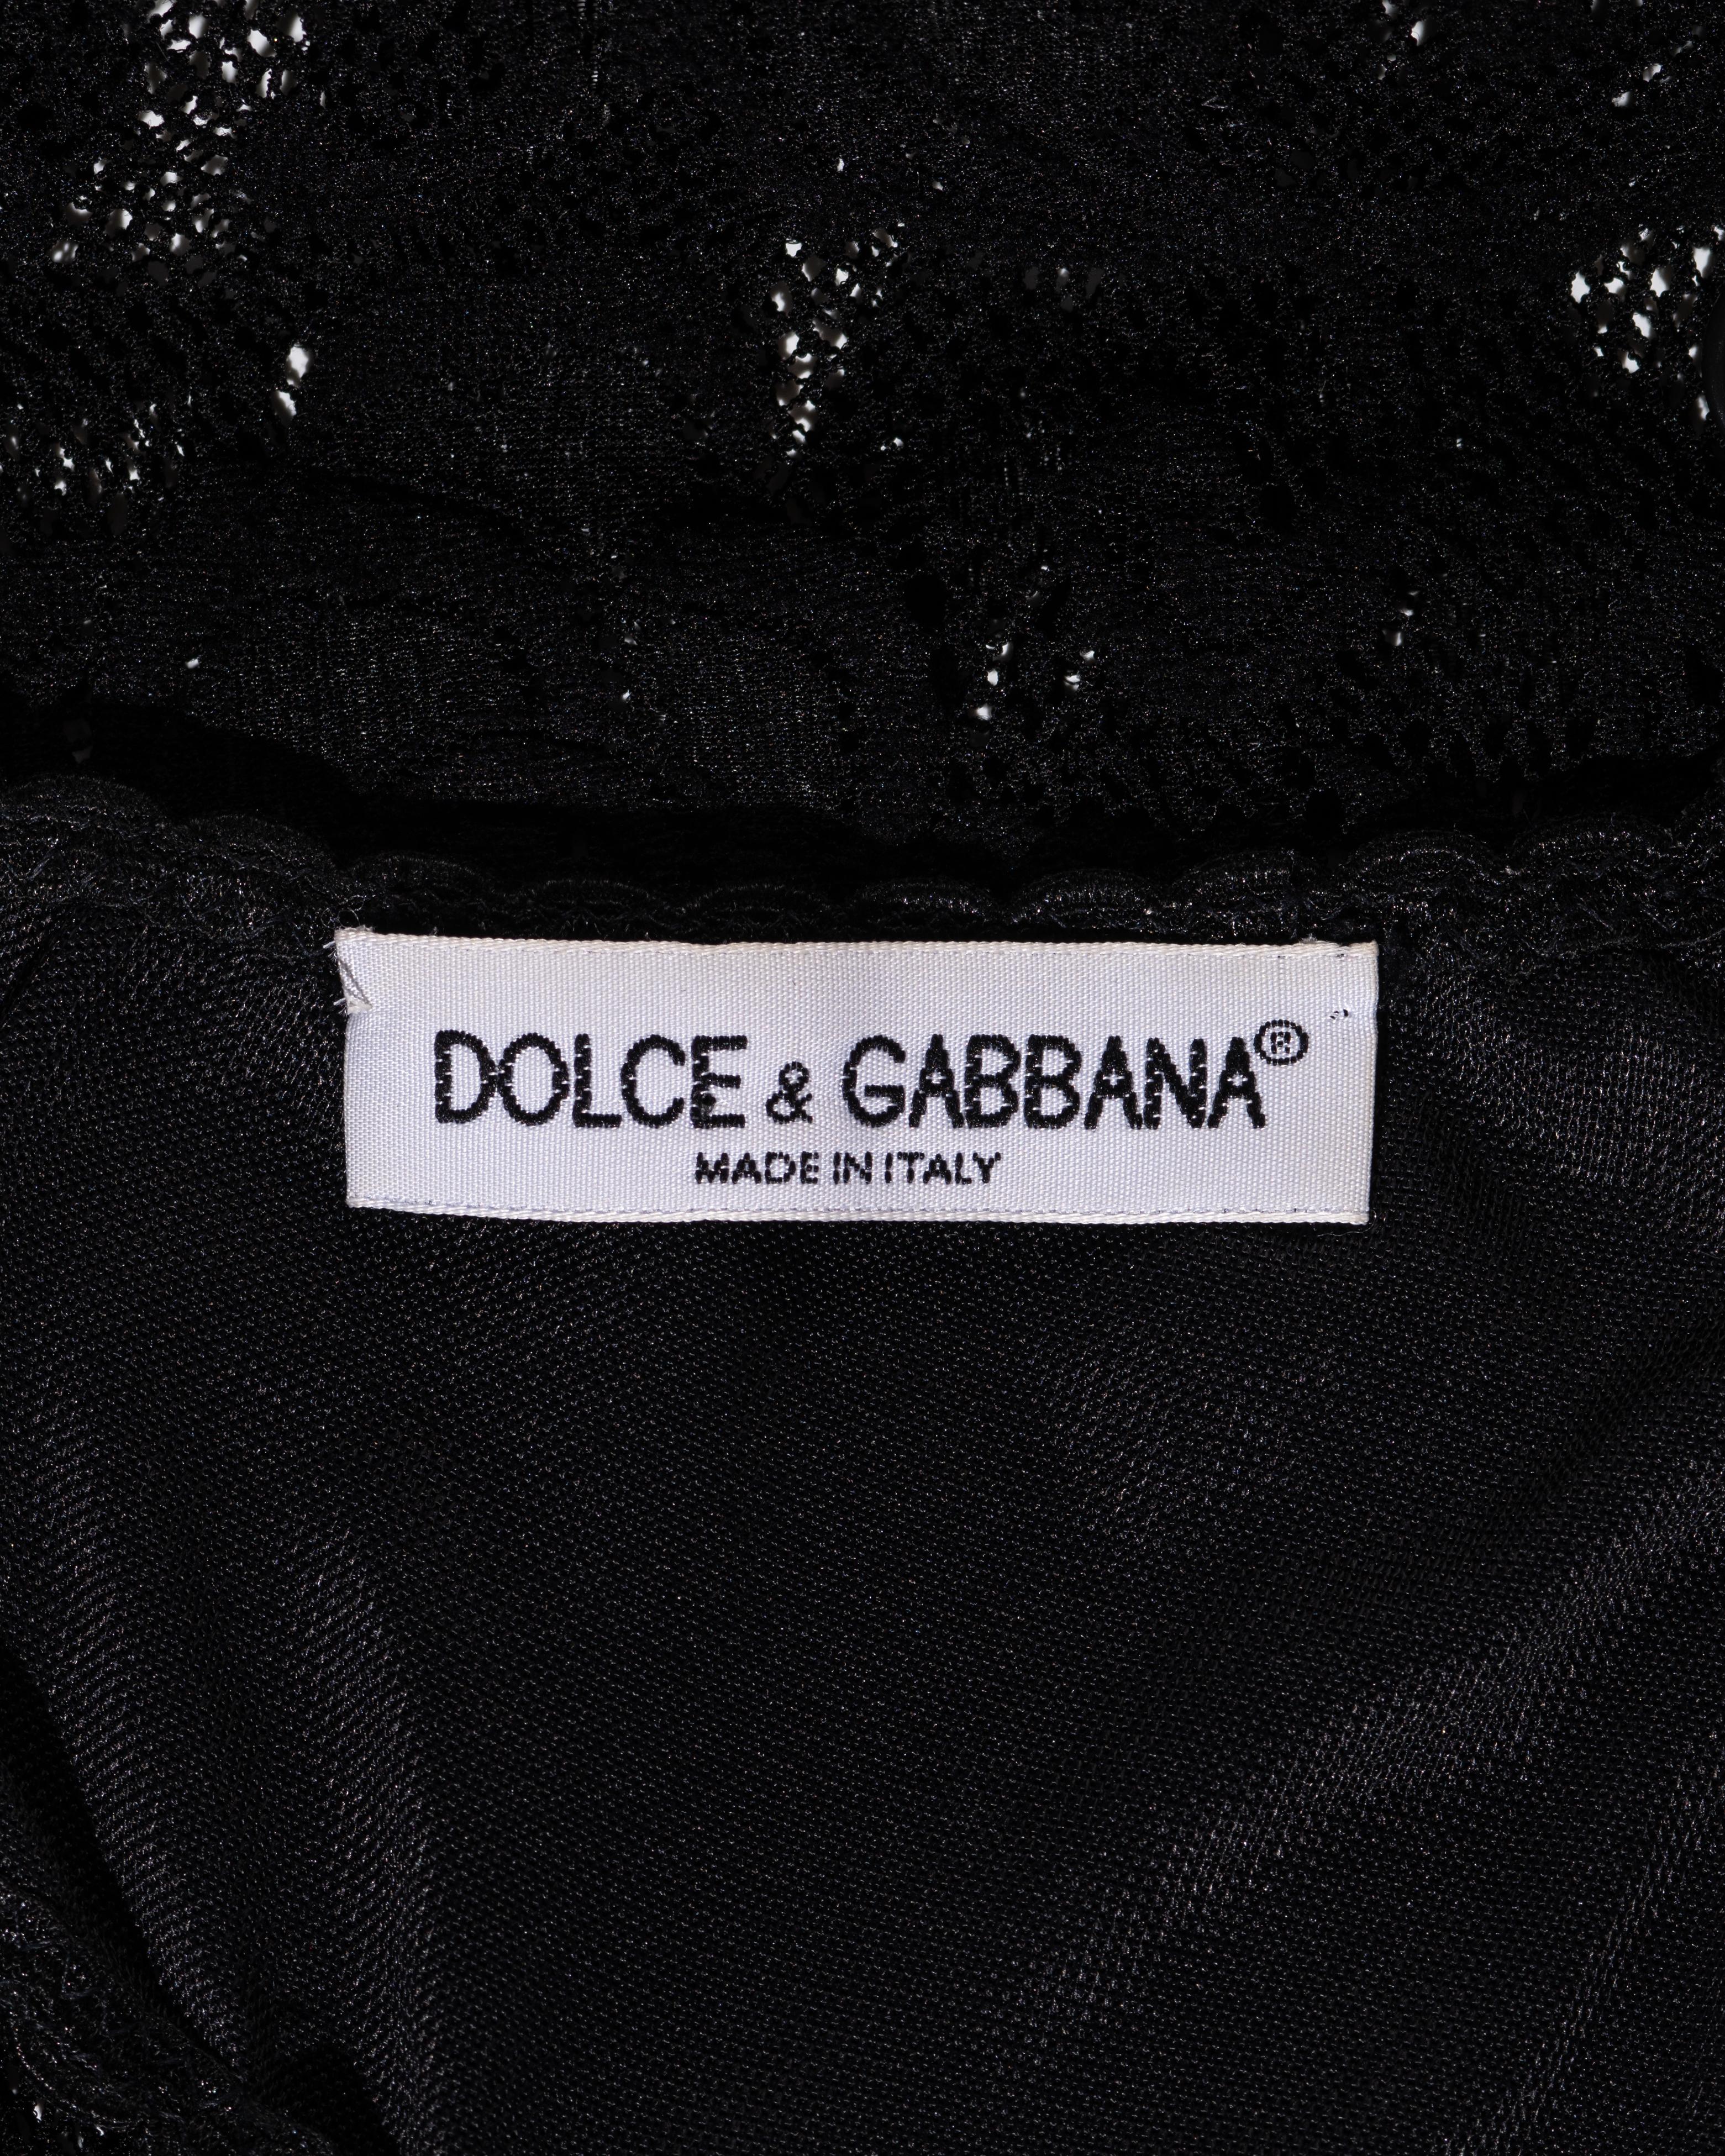 Women's Dolce & Gabbana black lace maxi dress with attached bra, ss 1997